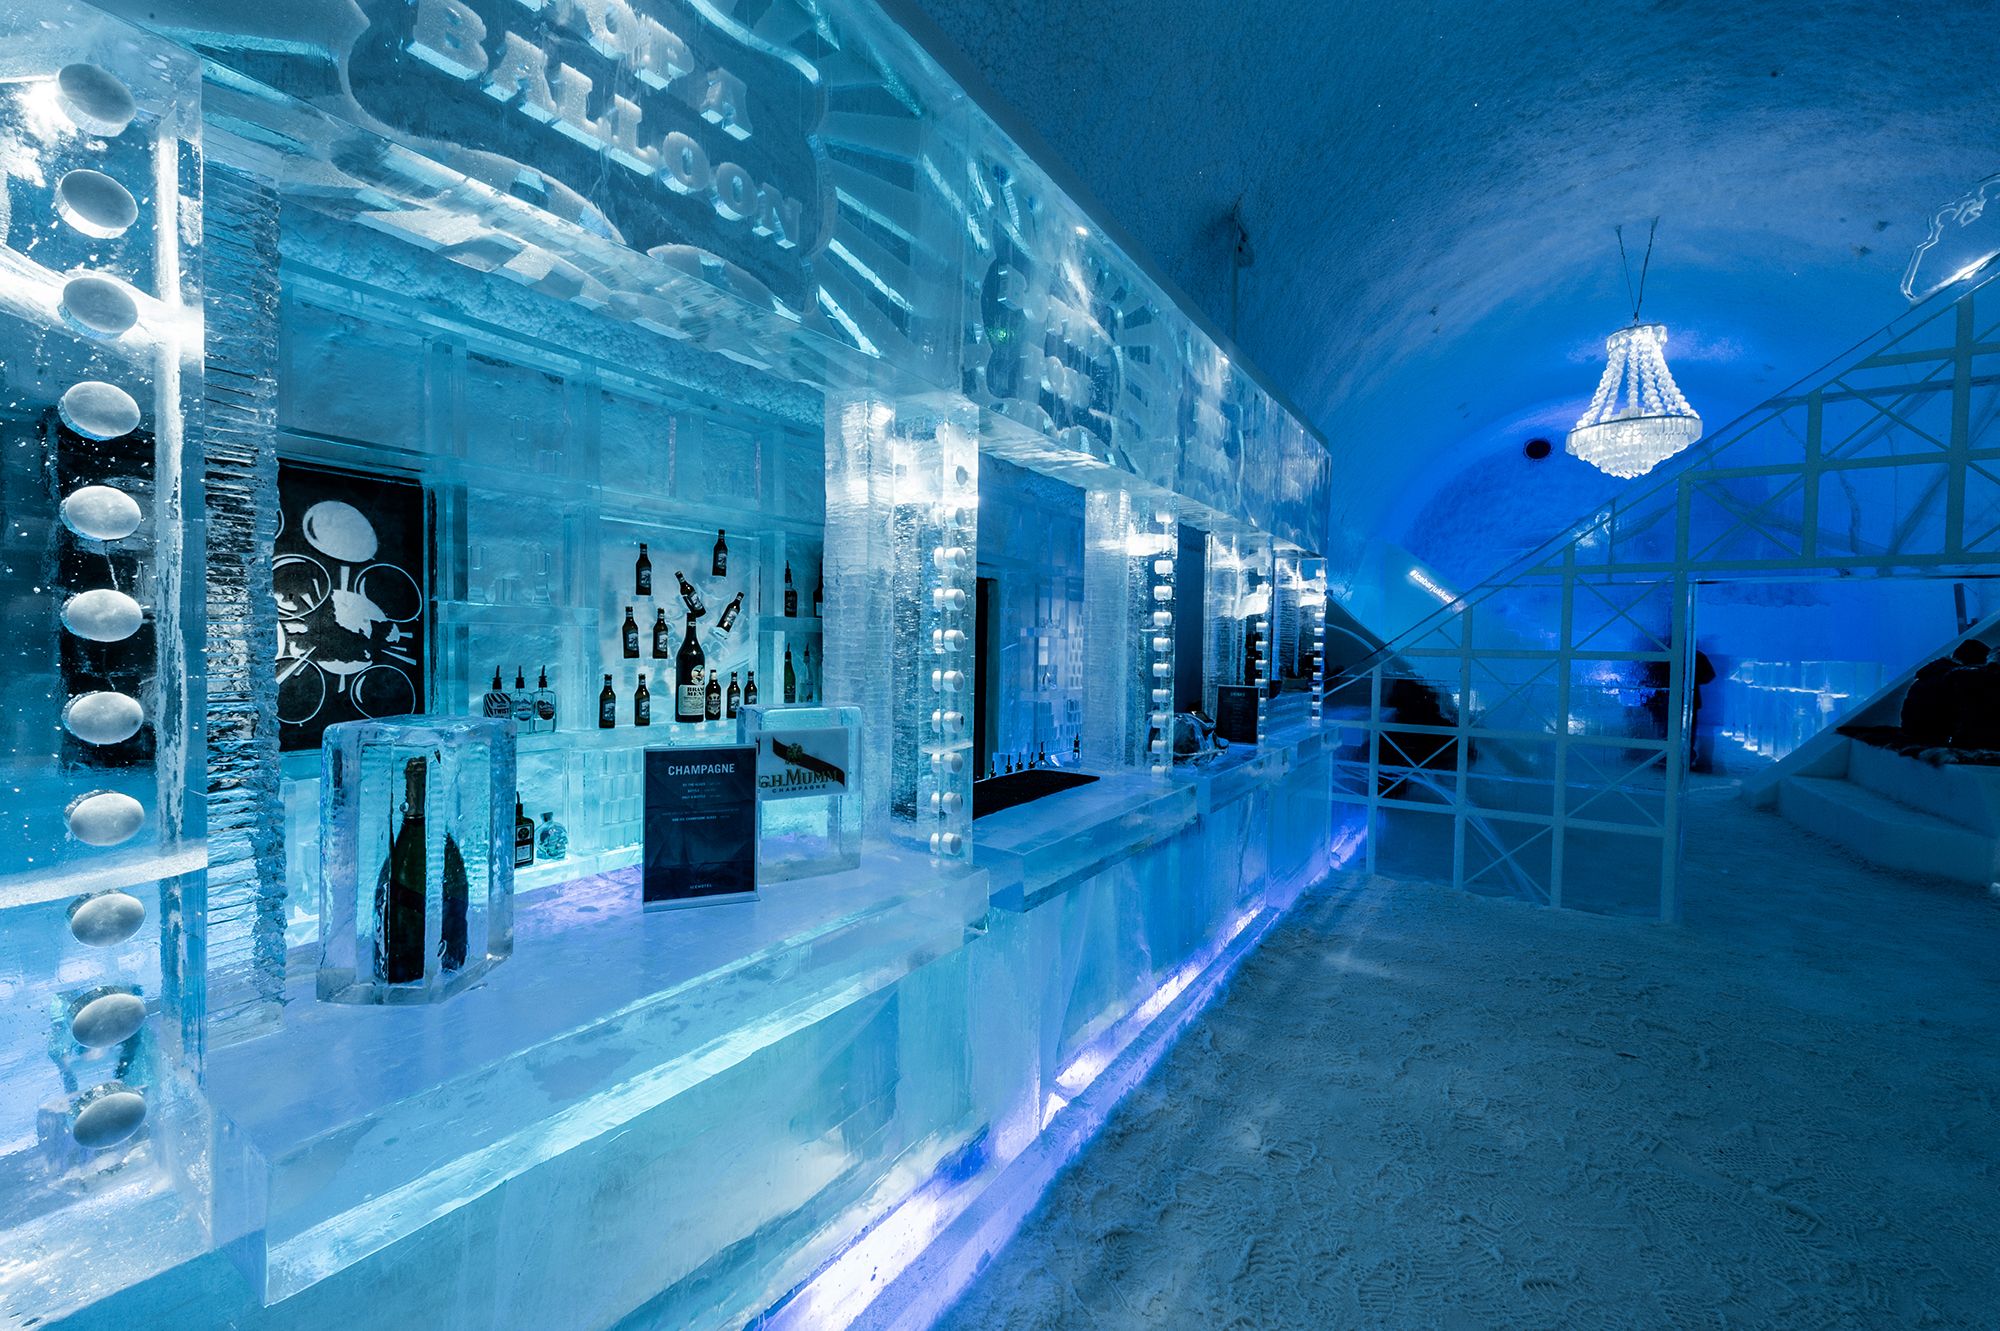 Ice hotel Sweden: Inside the new hotel open for winter 2020